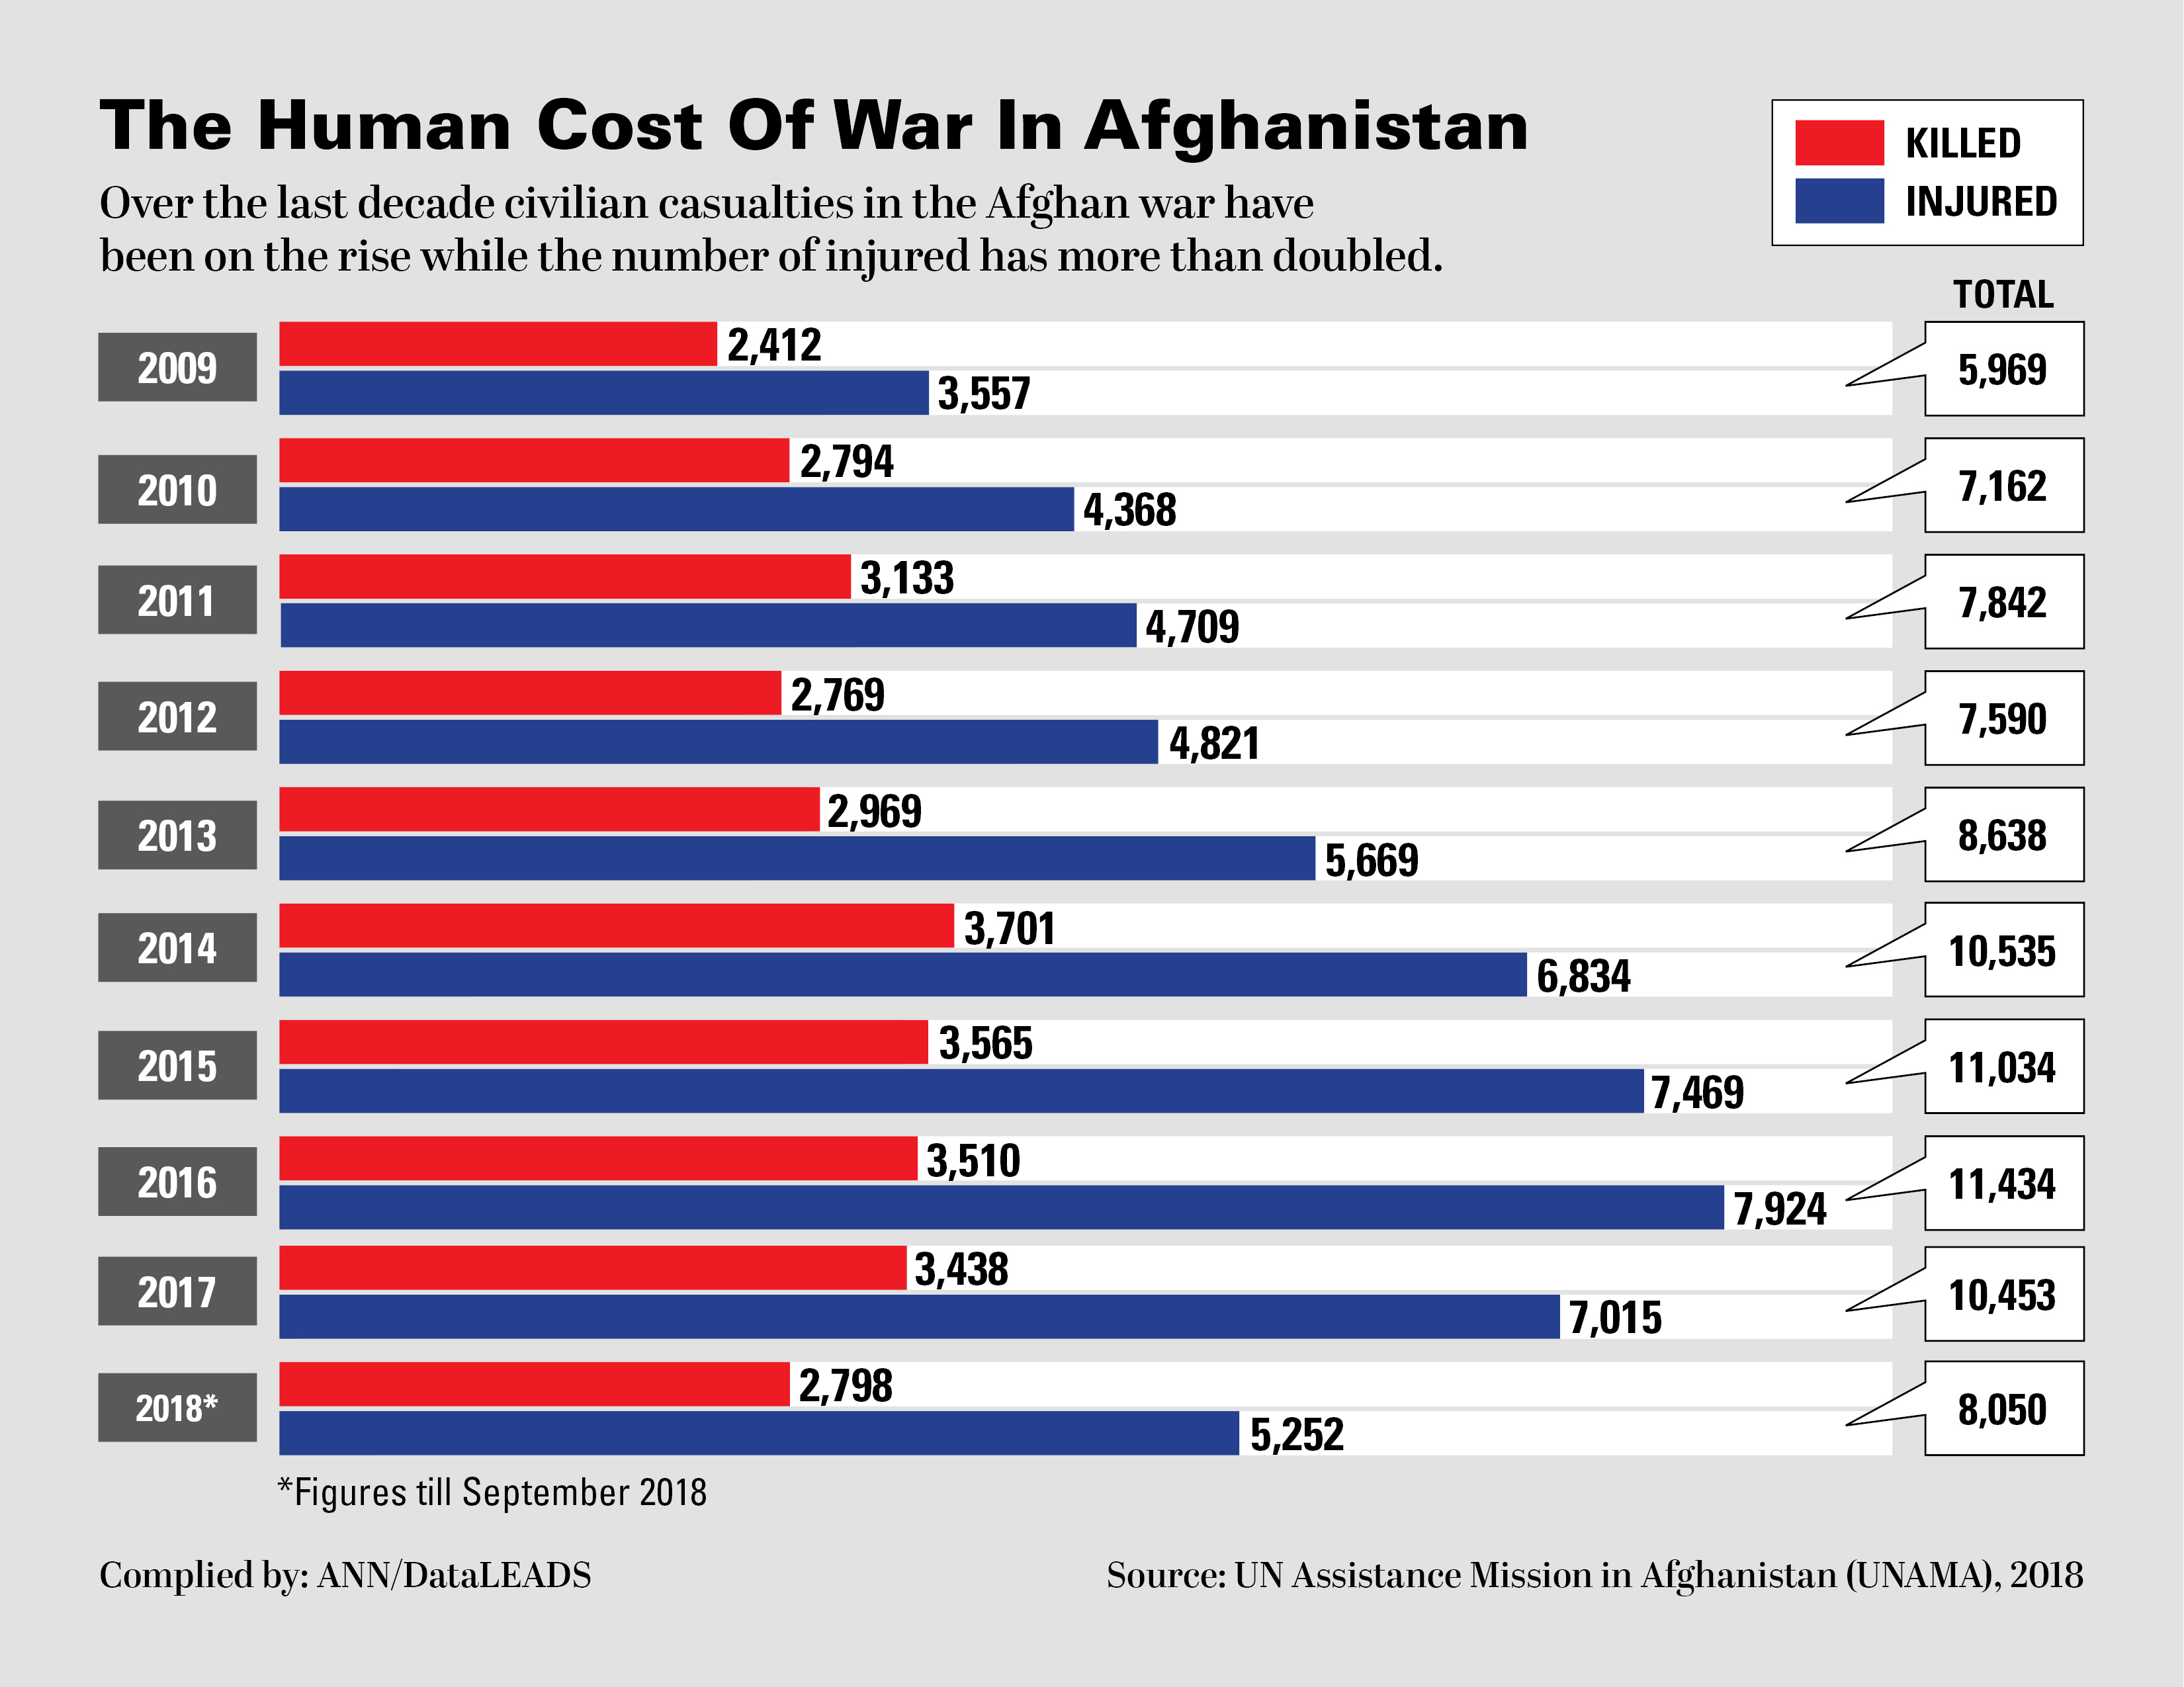 The human cost of Afghan war